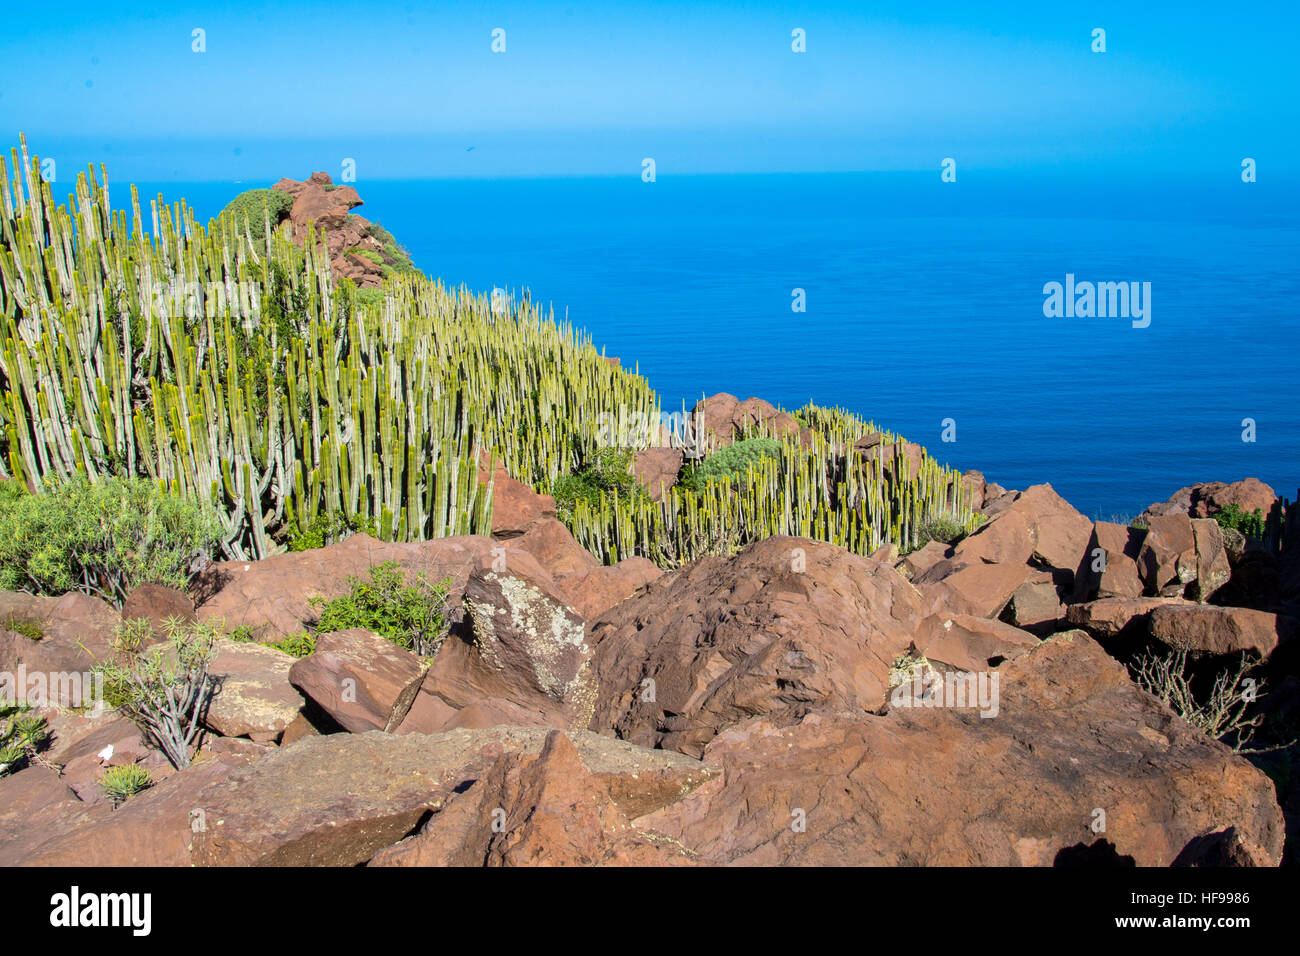 cactus and blue sly at gran canaria spain Stock Photo